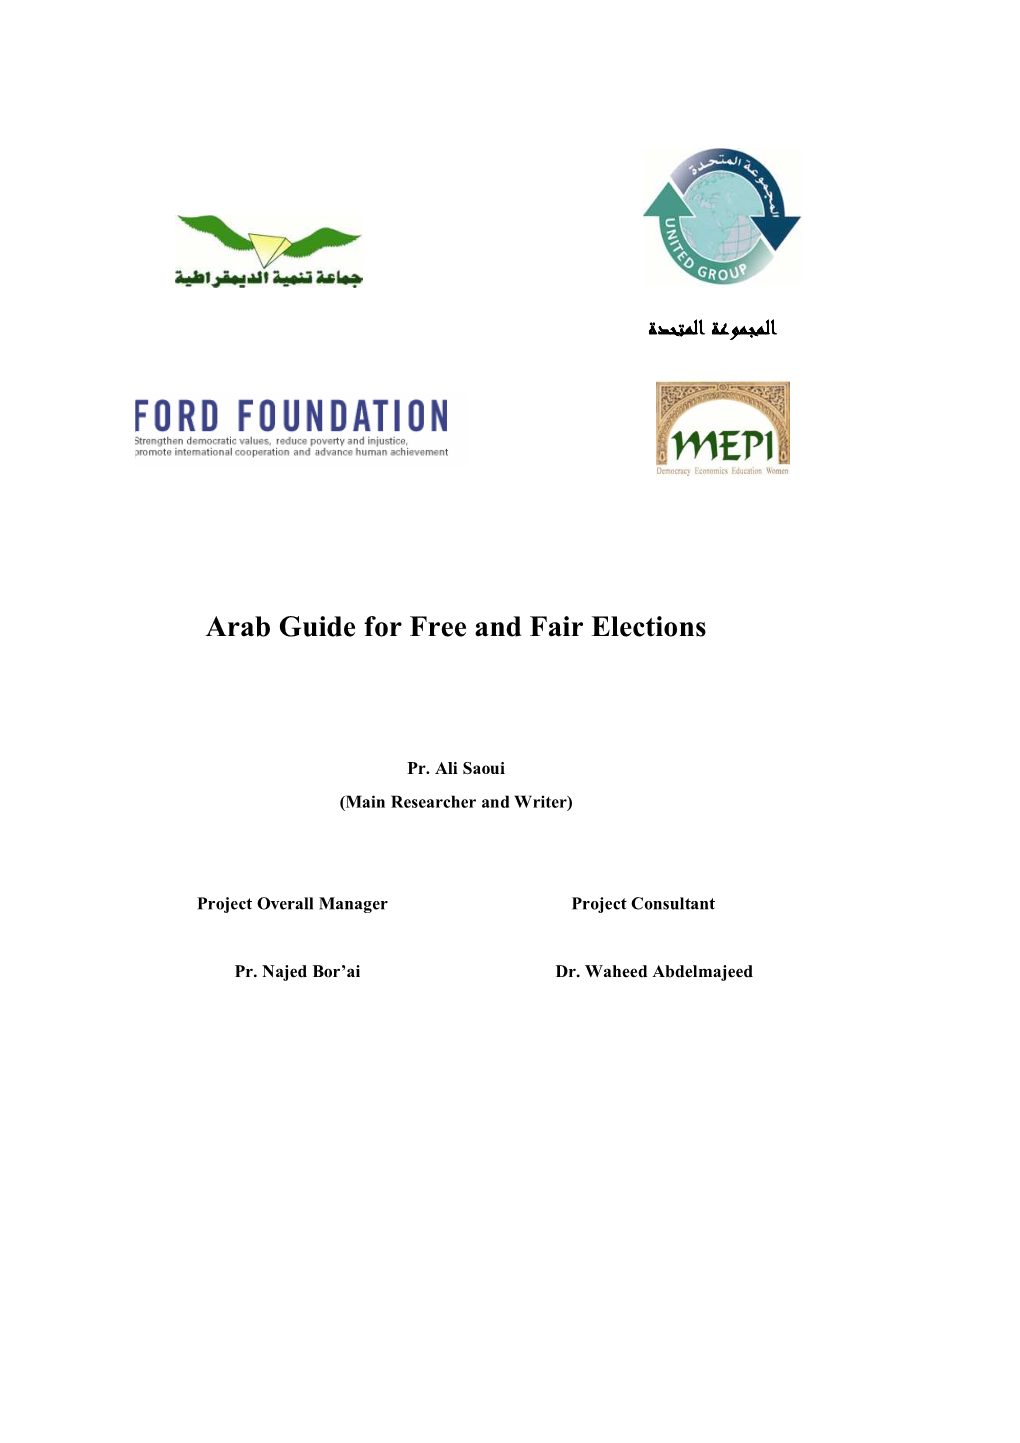 Arab Guide for Free and Fair Elections